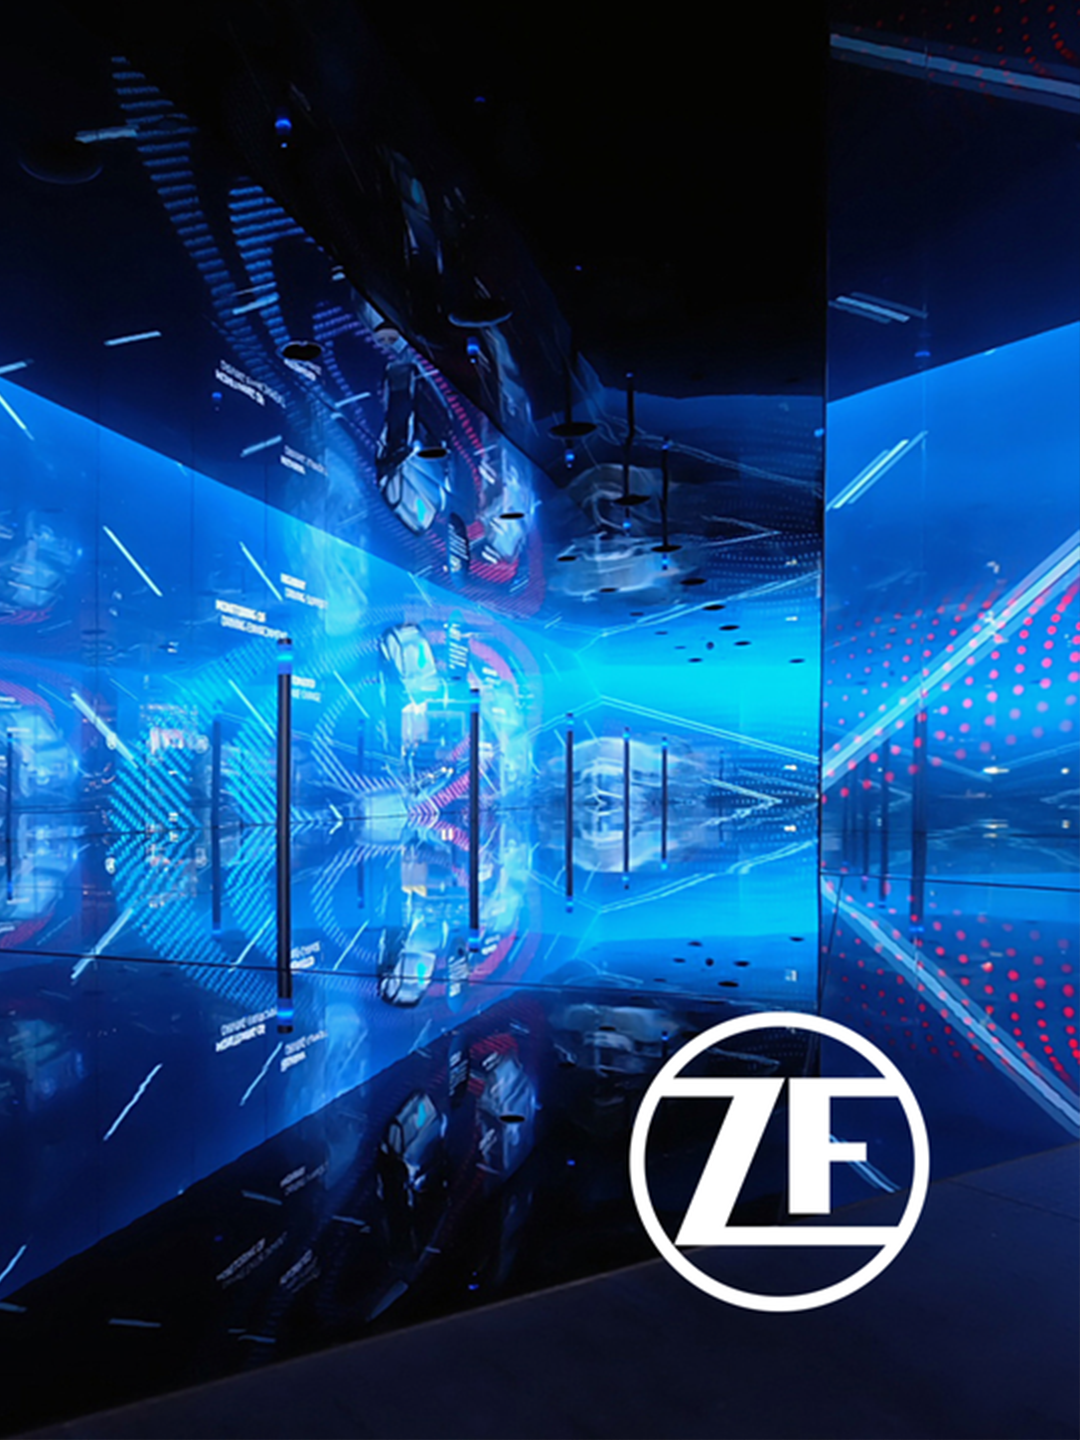 Image from the Brand Strategy campaign "Start of a new era" by Jung von Matt BRAND IDENTITY for the technology group ZF.